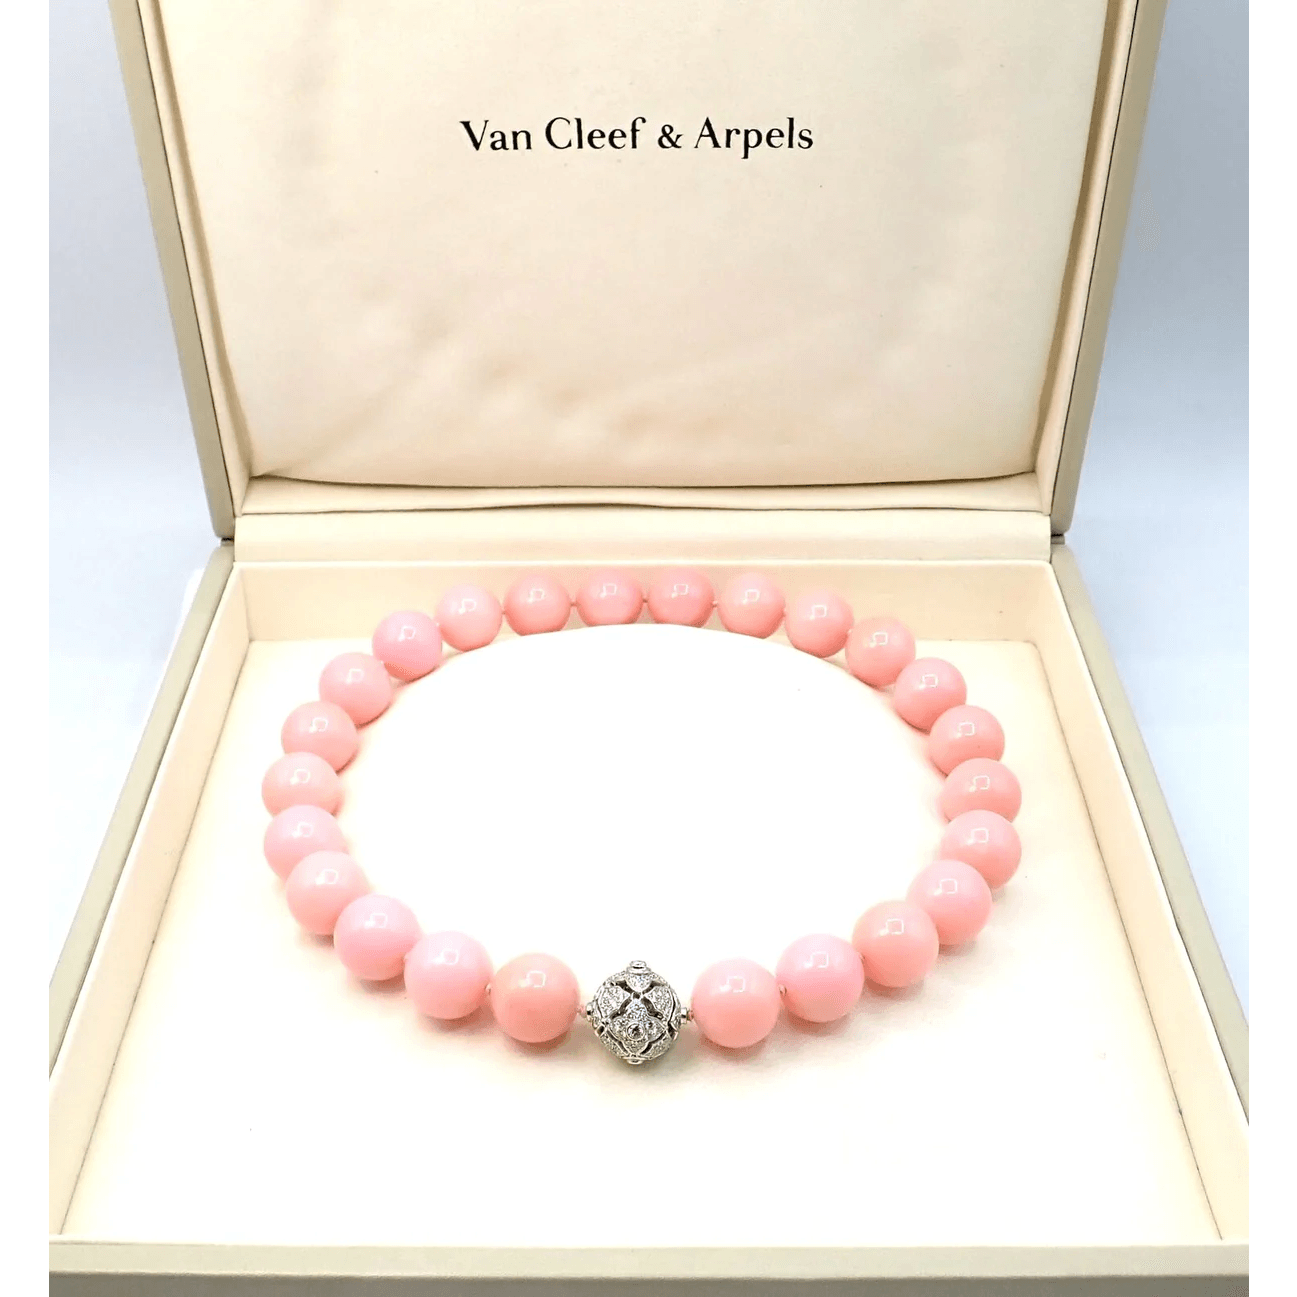 Van Cleef & Arpels Post-1980s 18KT White Gold Opal & Diamond Necklace in box